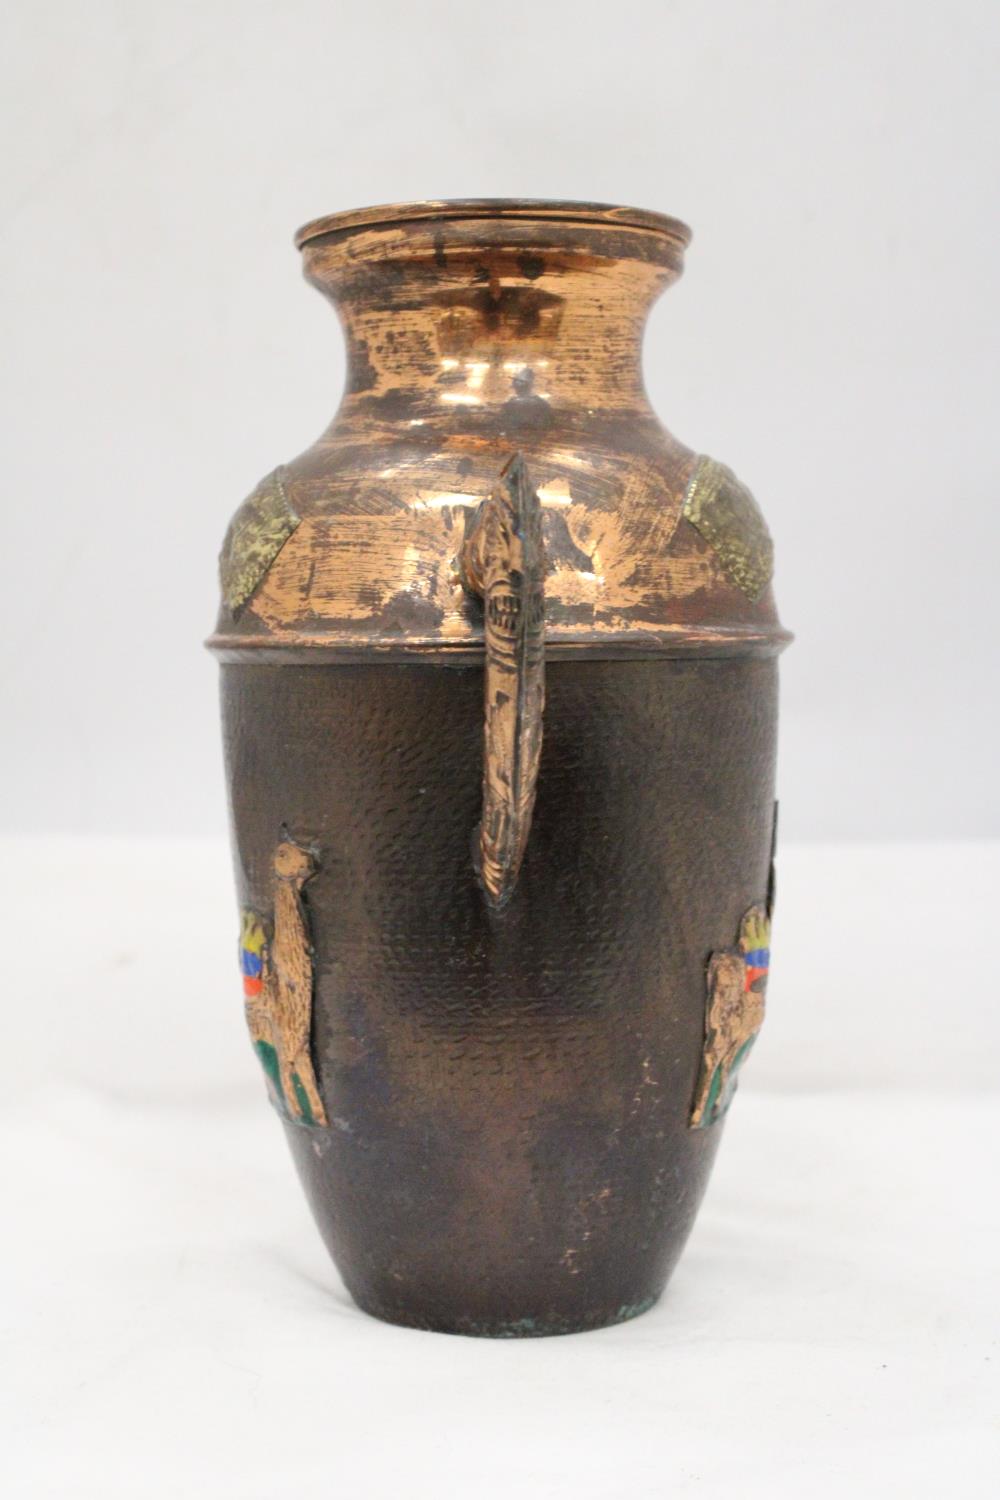 A VINTAGE COLOMBIAN MAYAN DECORATED COPPER VASE - Image 4 of 5